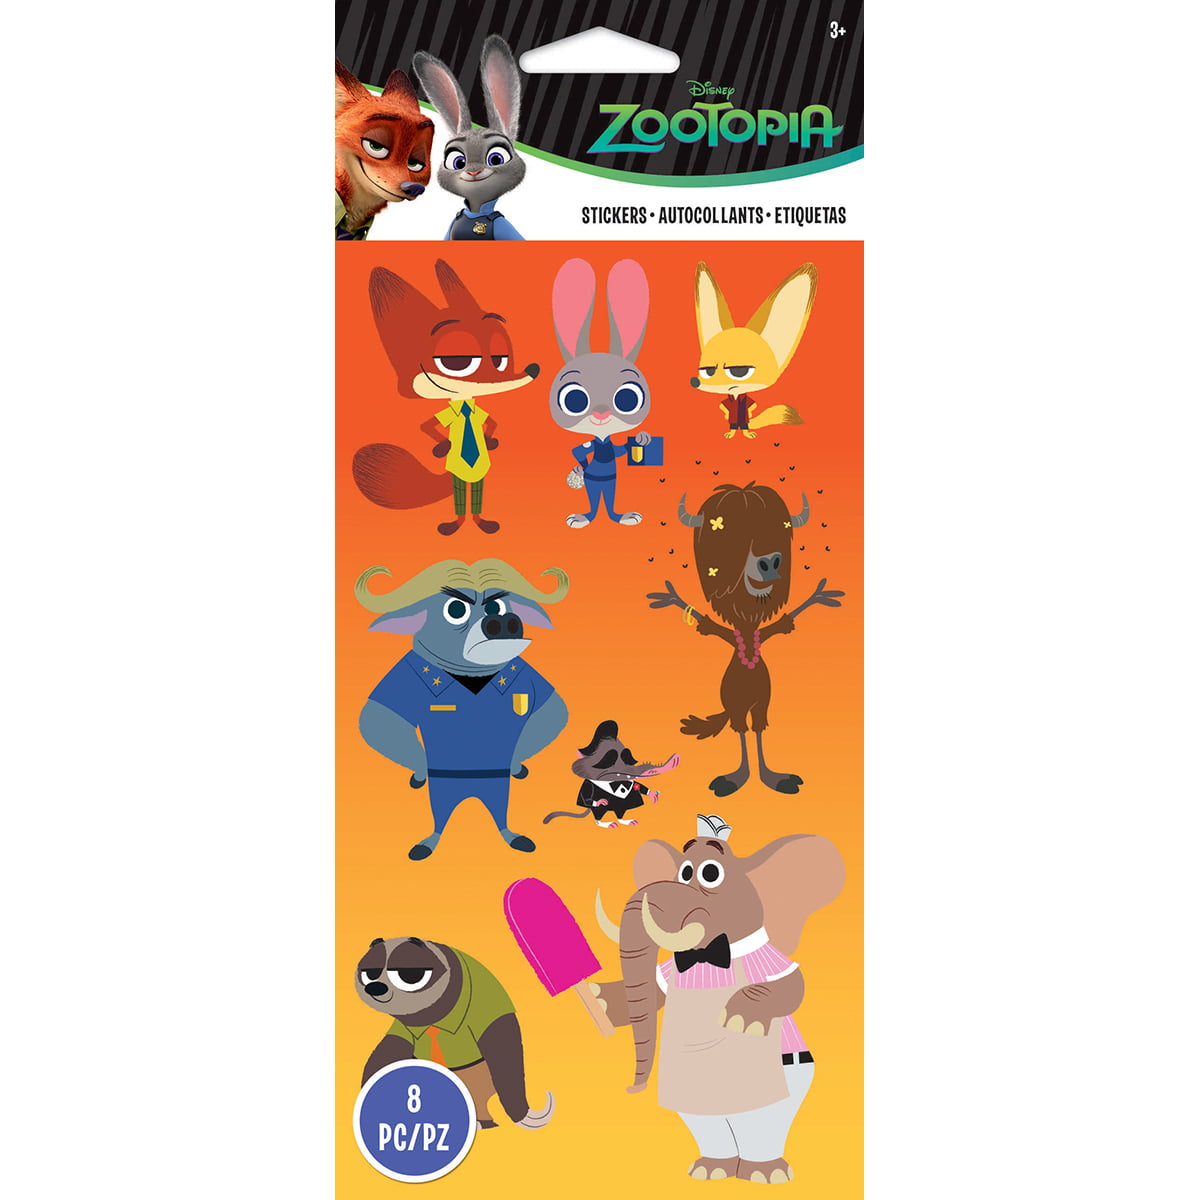 Zootropolis stickers pick 20 from list 